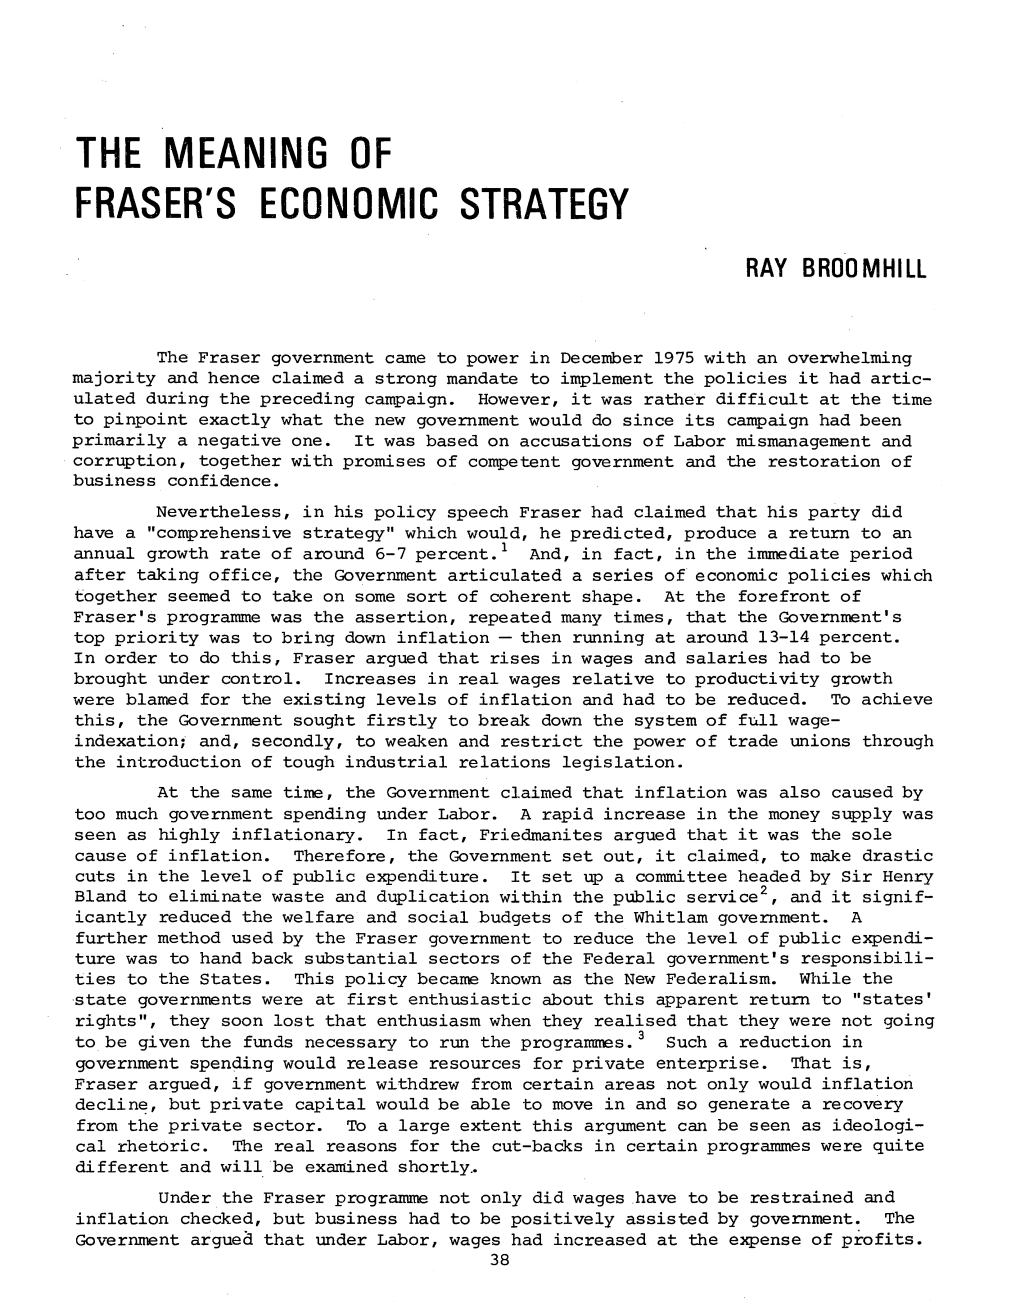 The Meaning of Fraser's Economic Strategy